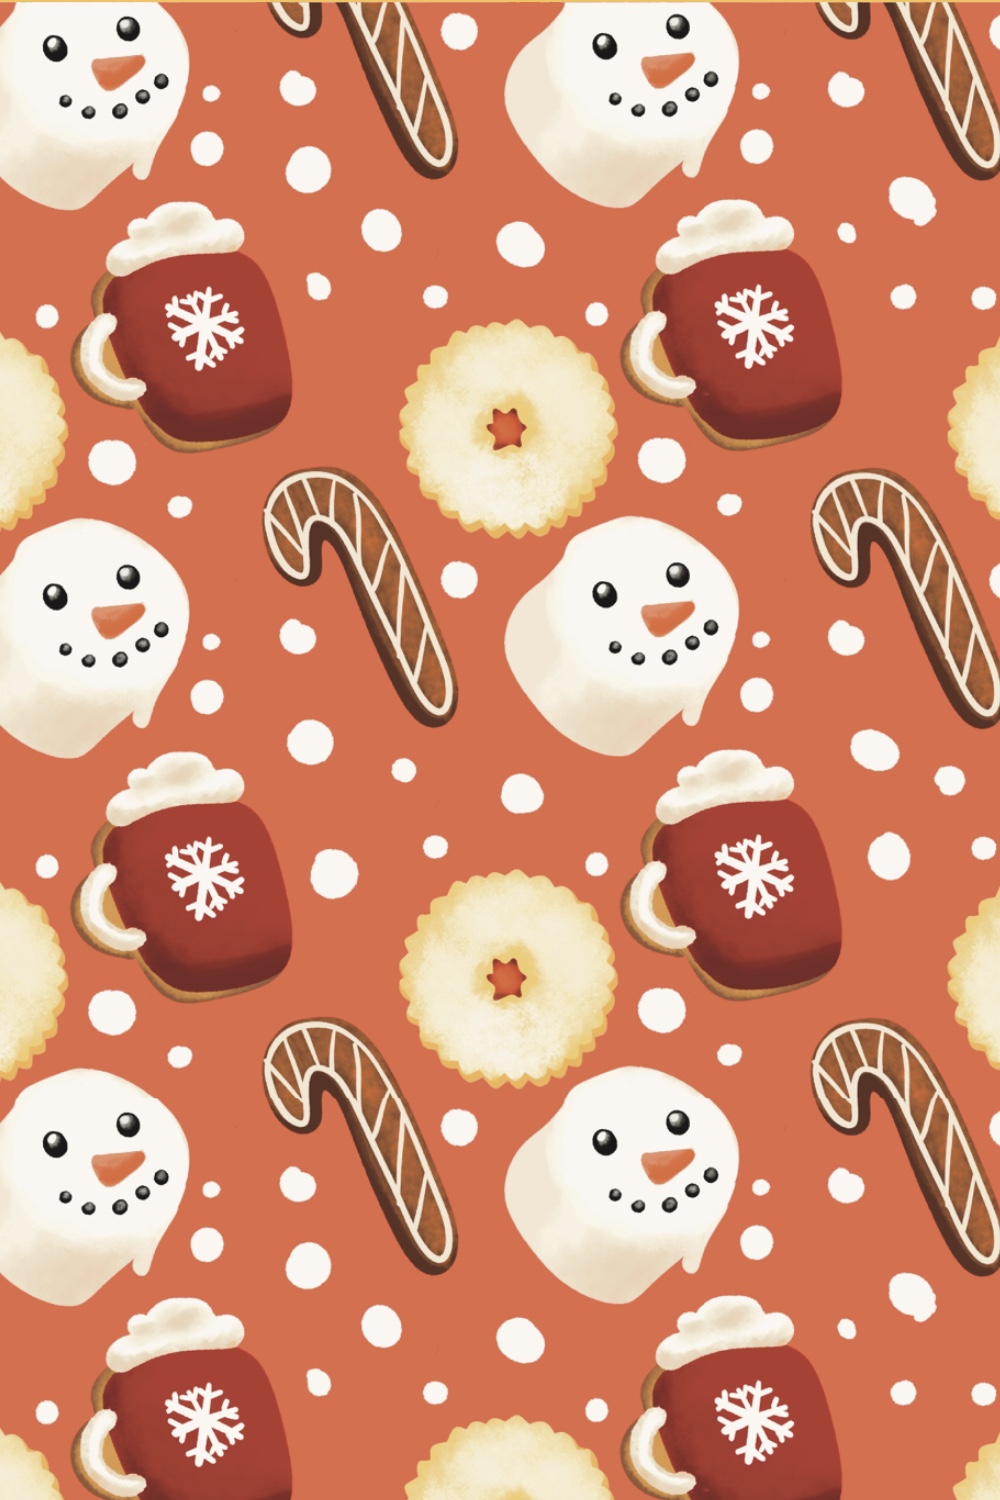 Sweets Christmas Colorful Pattern Design pinterest image.